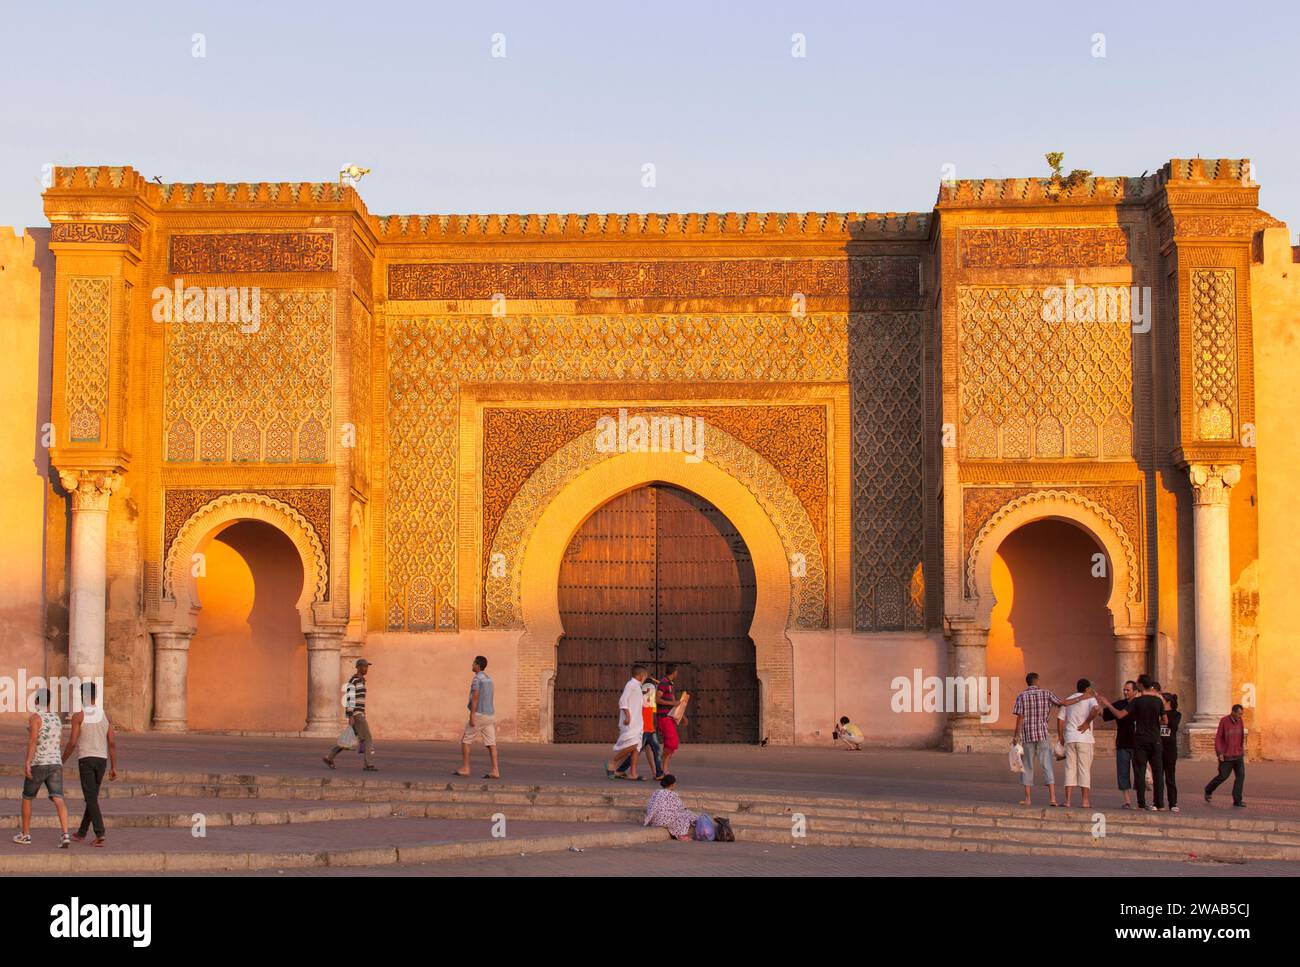 The Bab Mansour Gate at sunset, Meknes, Morocco. Stock Photo